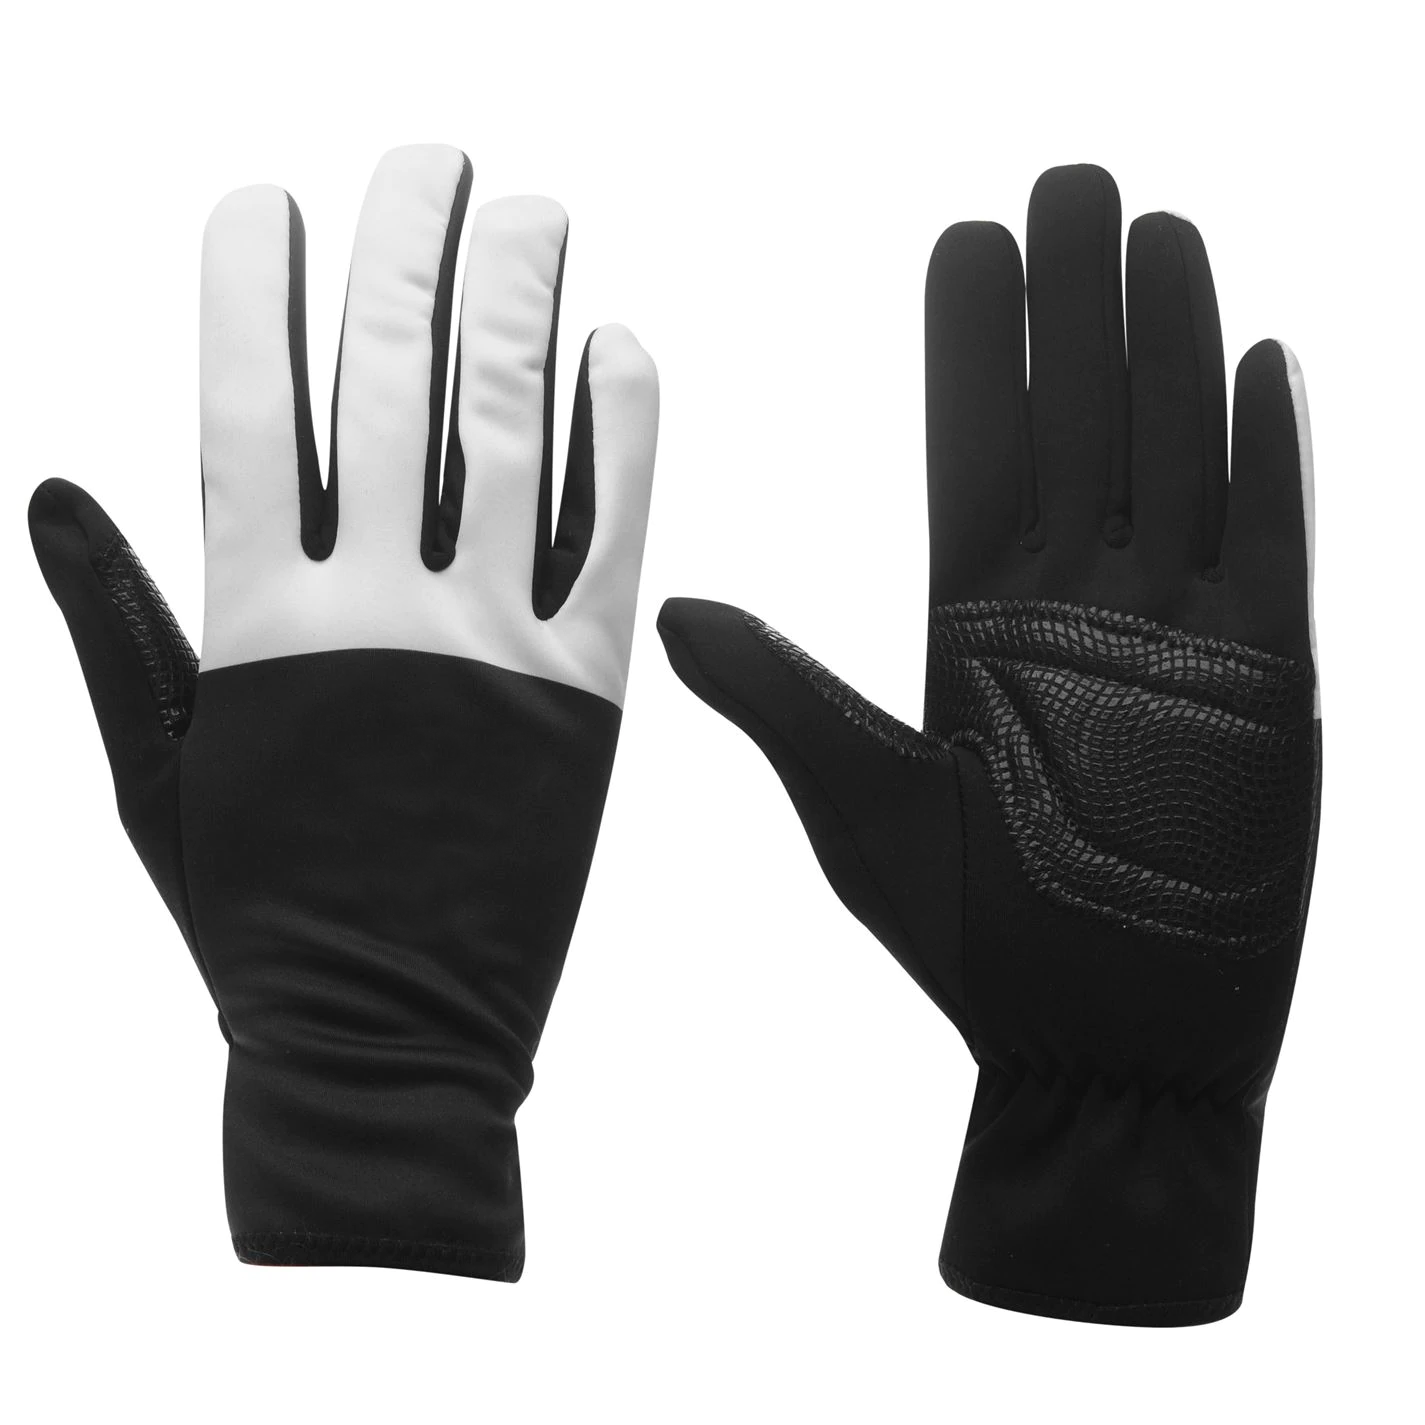 Men's cycling gloves winter full finger cycling sports gloves